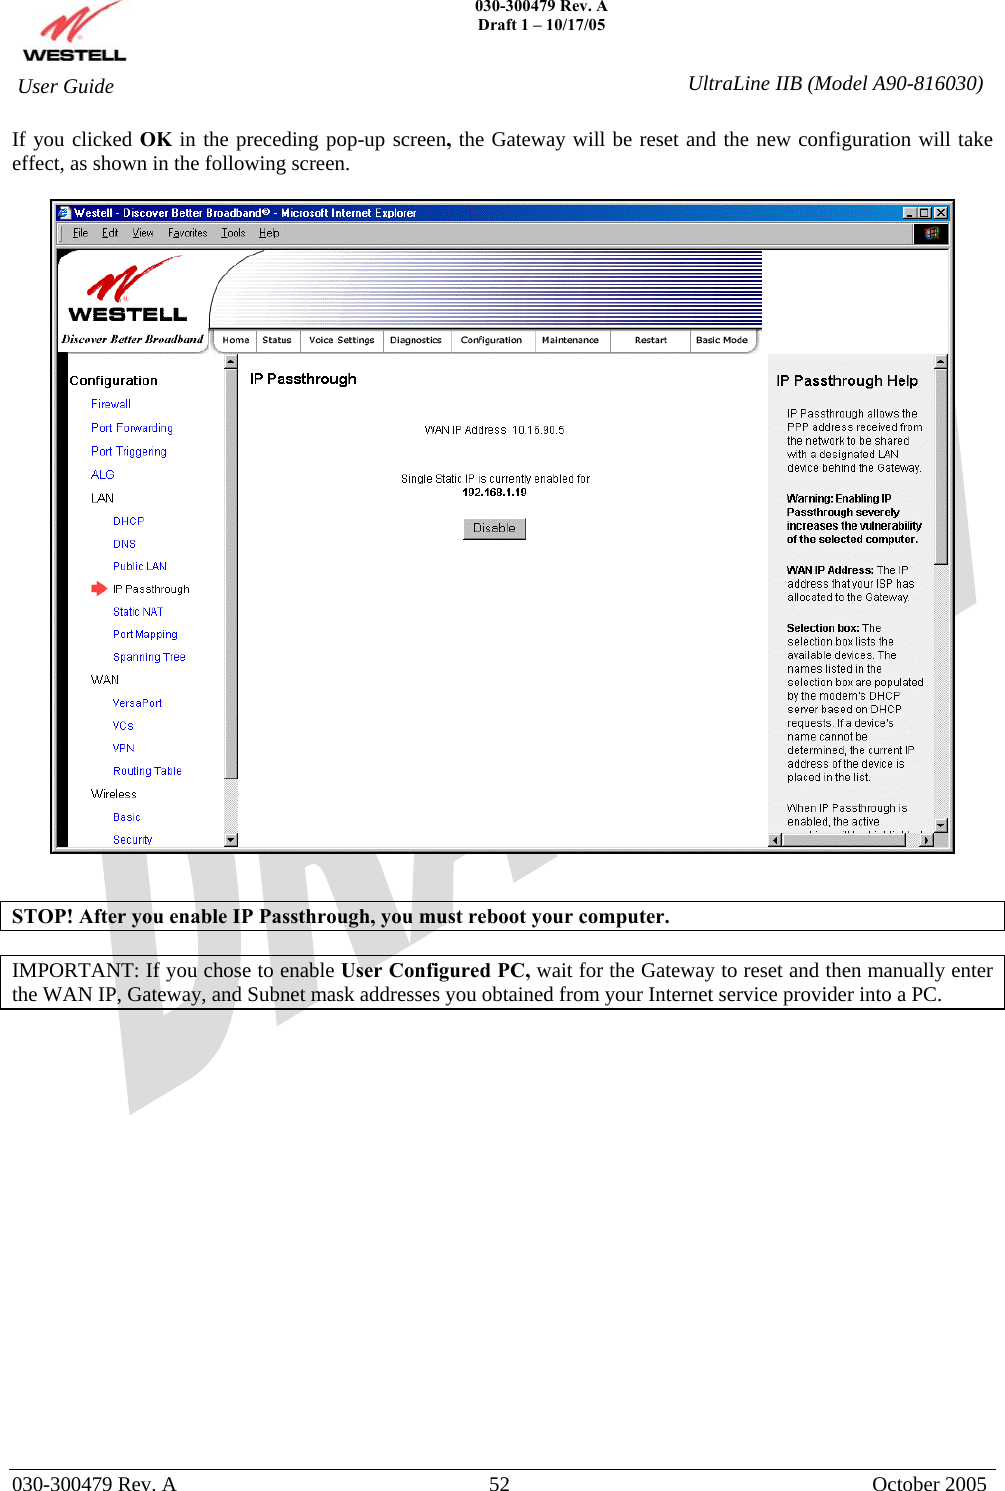    030-300479 Rev. A Draft 1 – 10/17/05   030-300479 Rev. A  52  October 2005  User Guide  UltraLine IIB (Model A90-816030)If you clicked OK in the preceding pop-up screen, the Gateway will be reset and the new configuration will take effect, as shown in the following screen.     STOP! After you enable IP Passthrough, you must reboot your computer.  IMPORTANT: If you chose to enable User Configured PC, wait for the Gateway to reset and then manually enter the WAN IP, Gateway, and Subnet mask addresses you obtained from your Internet service provider into a PC.                  